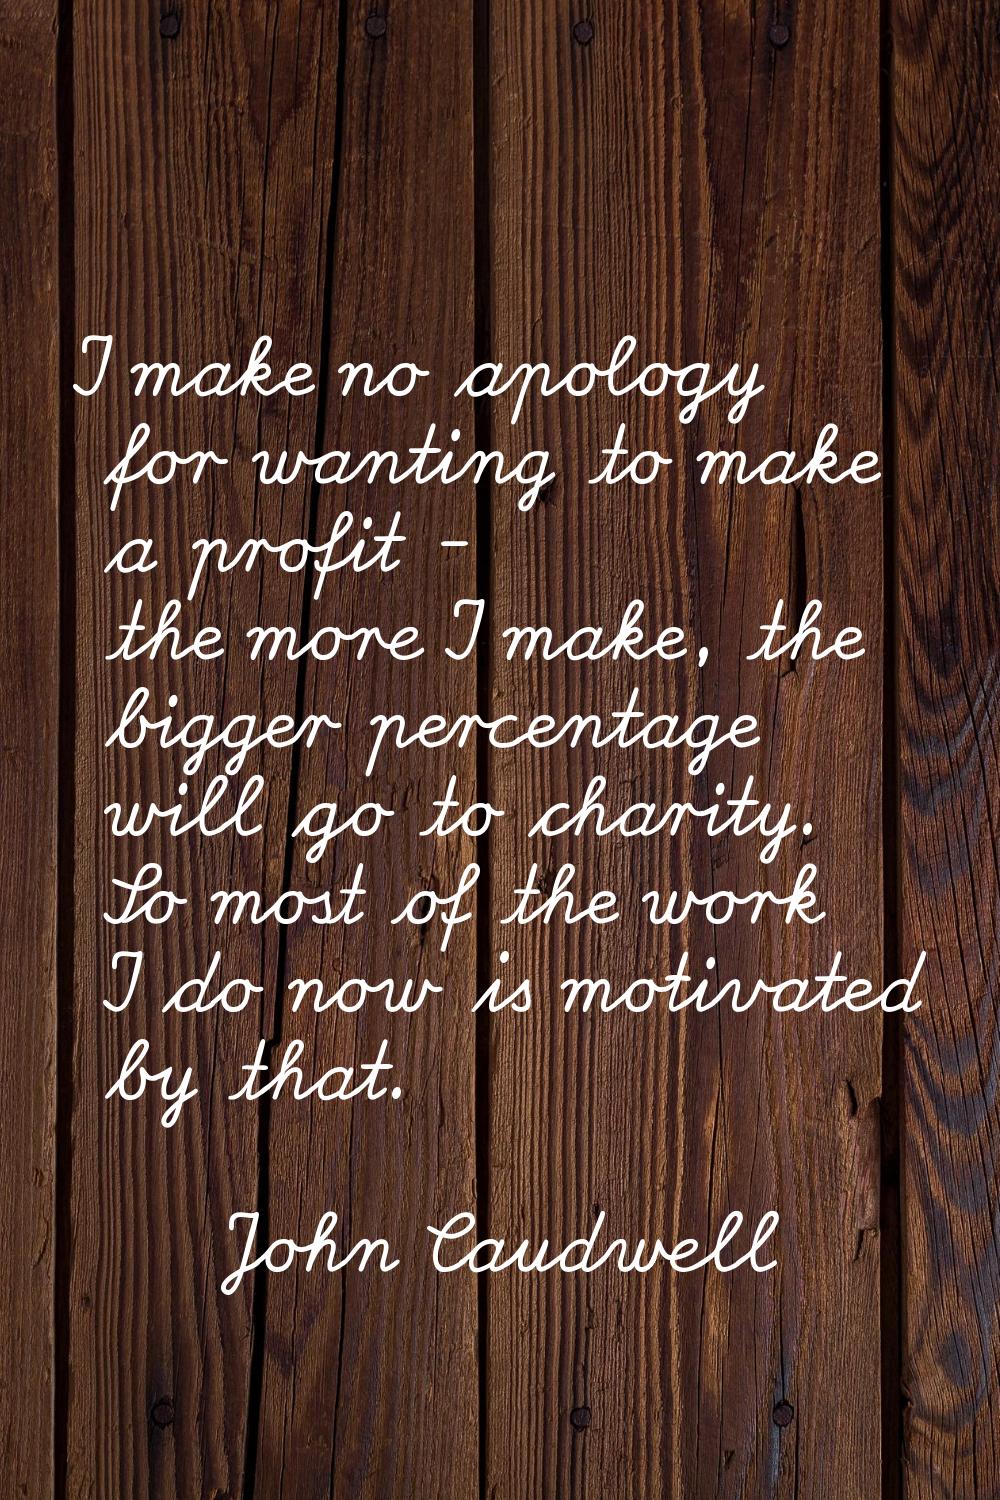 I make no apology for wanting to make a profit - the more I make, the bigger percentage will go to 